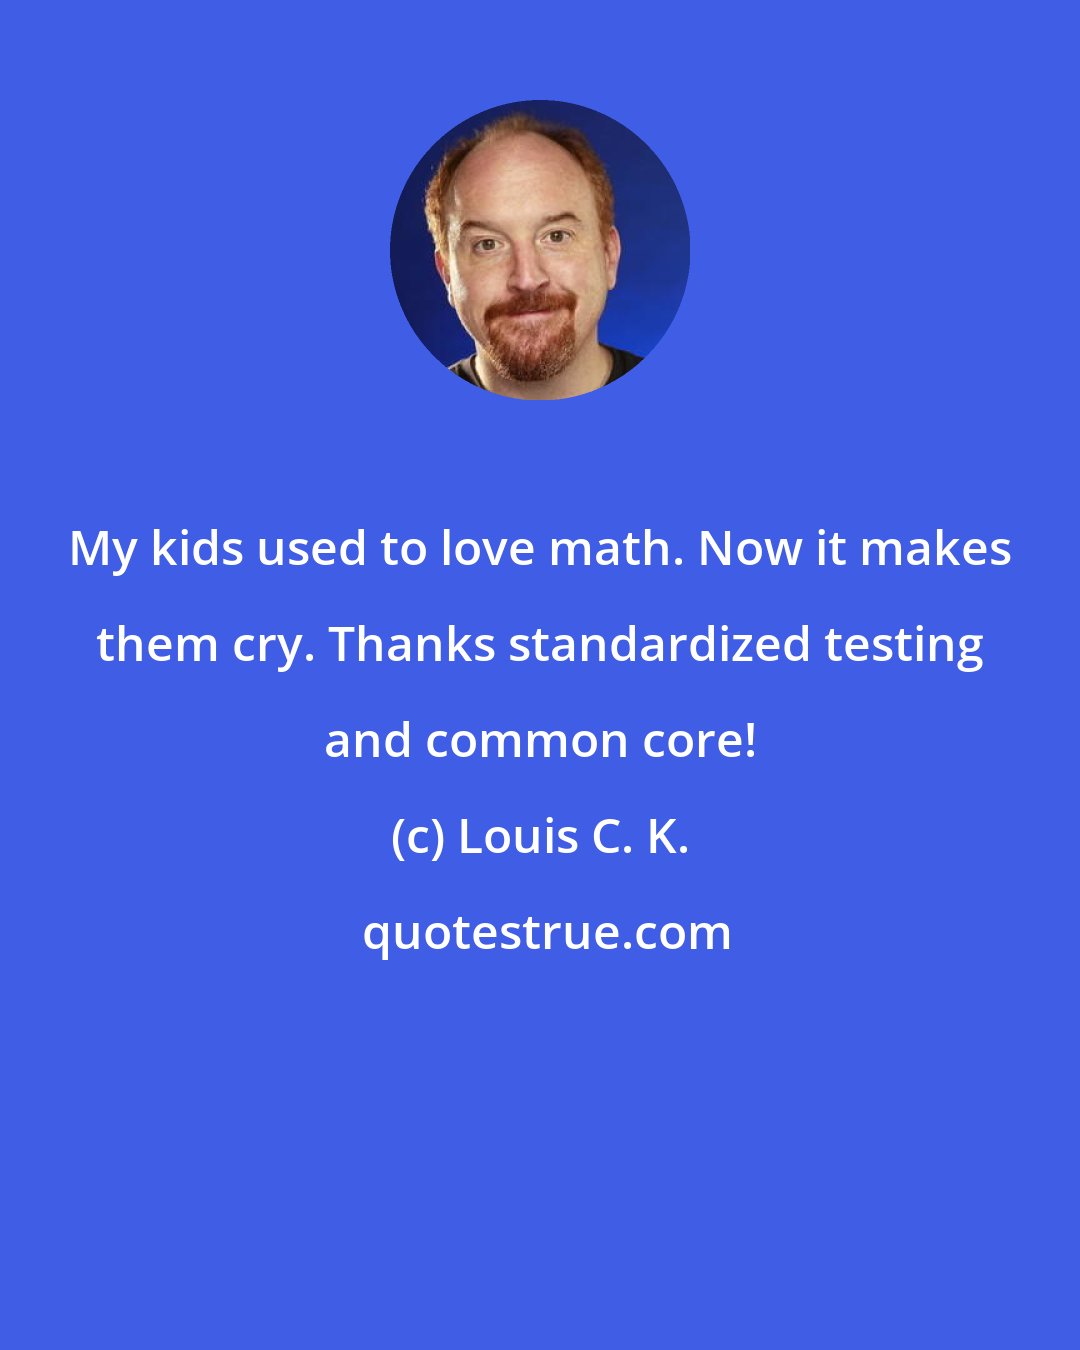 Louis C. K.: My kids used to love math. Now it makes them cry. Thanks standardized testing and common core!